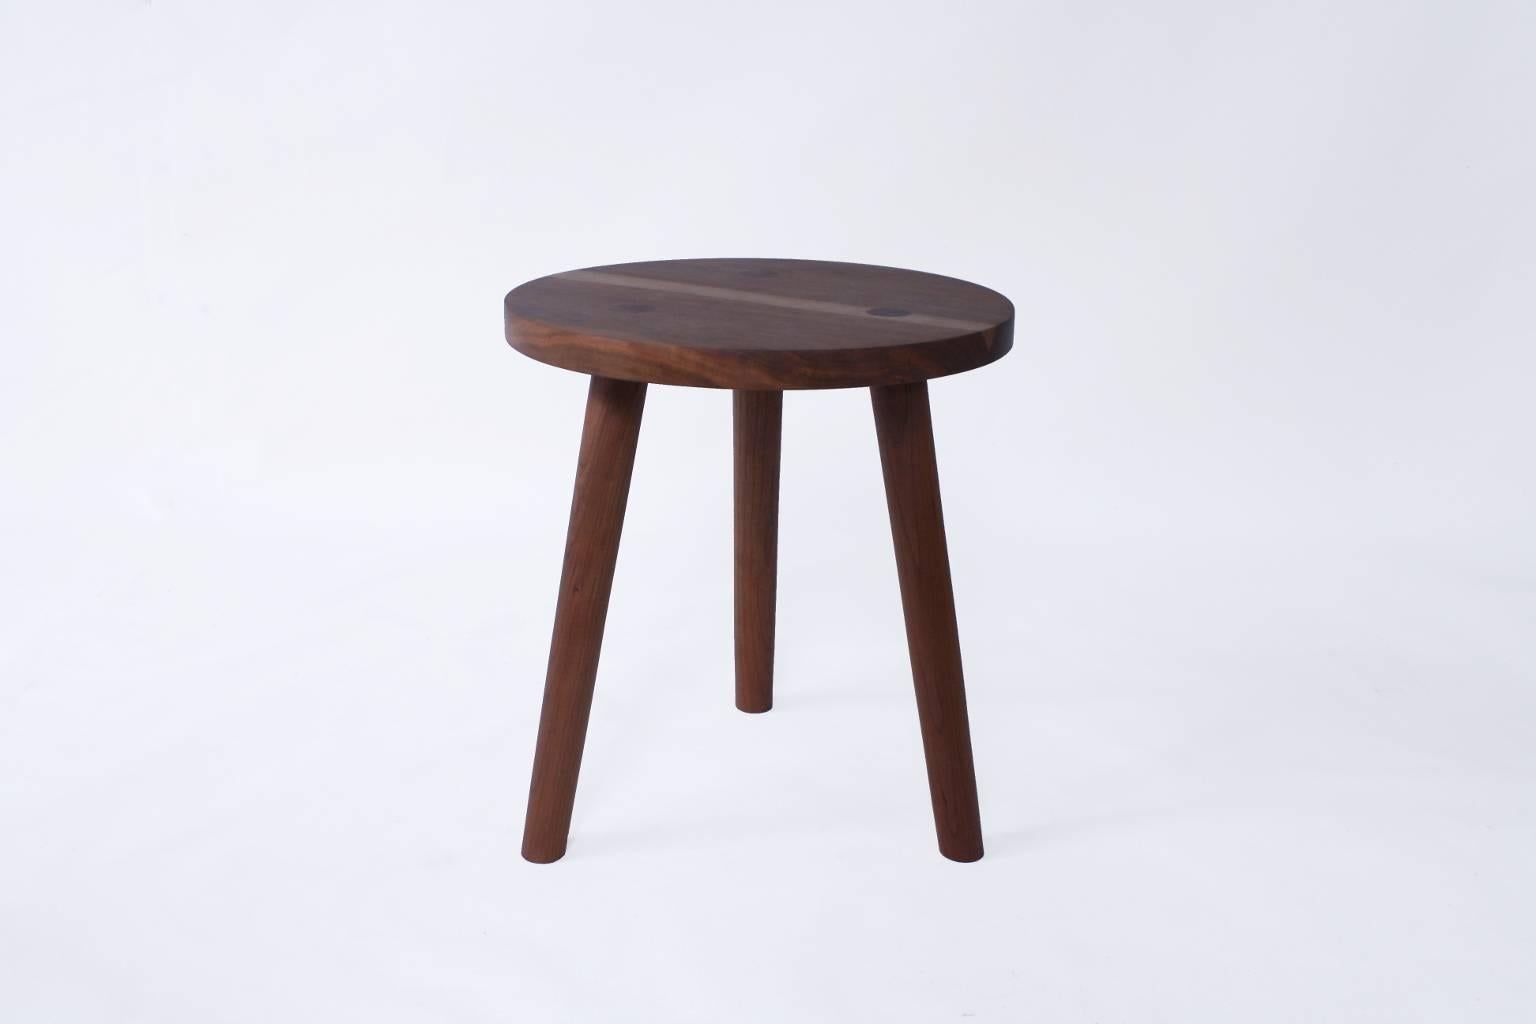 Modern Cherry, Handmade Stool or Side Table with Turned Legs For Sale